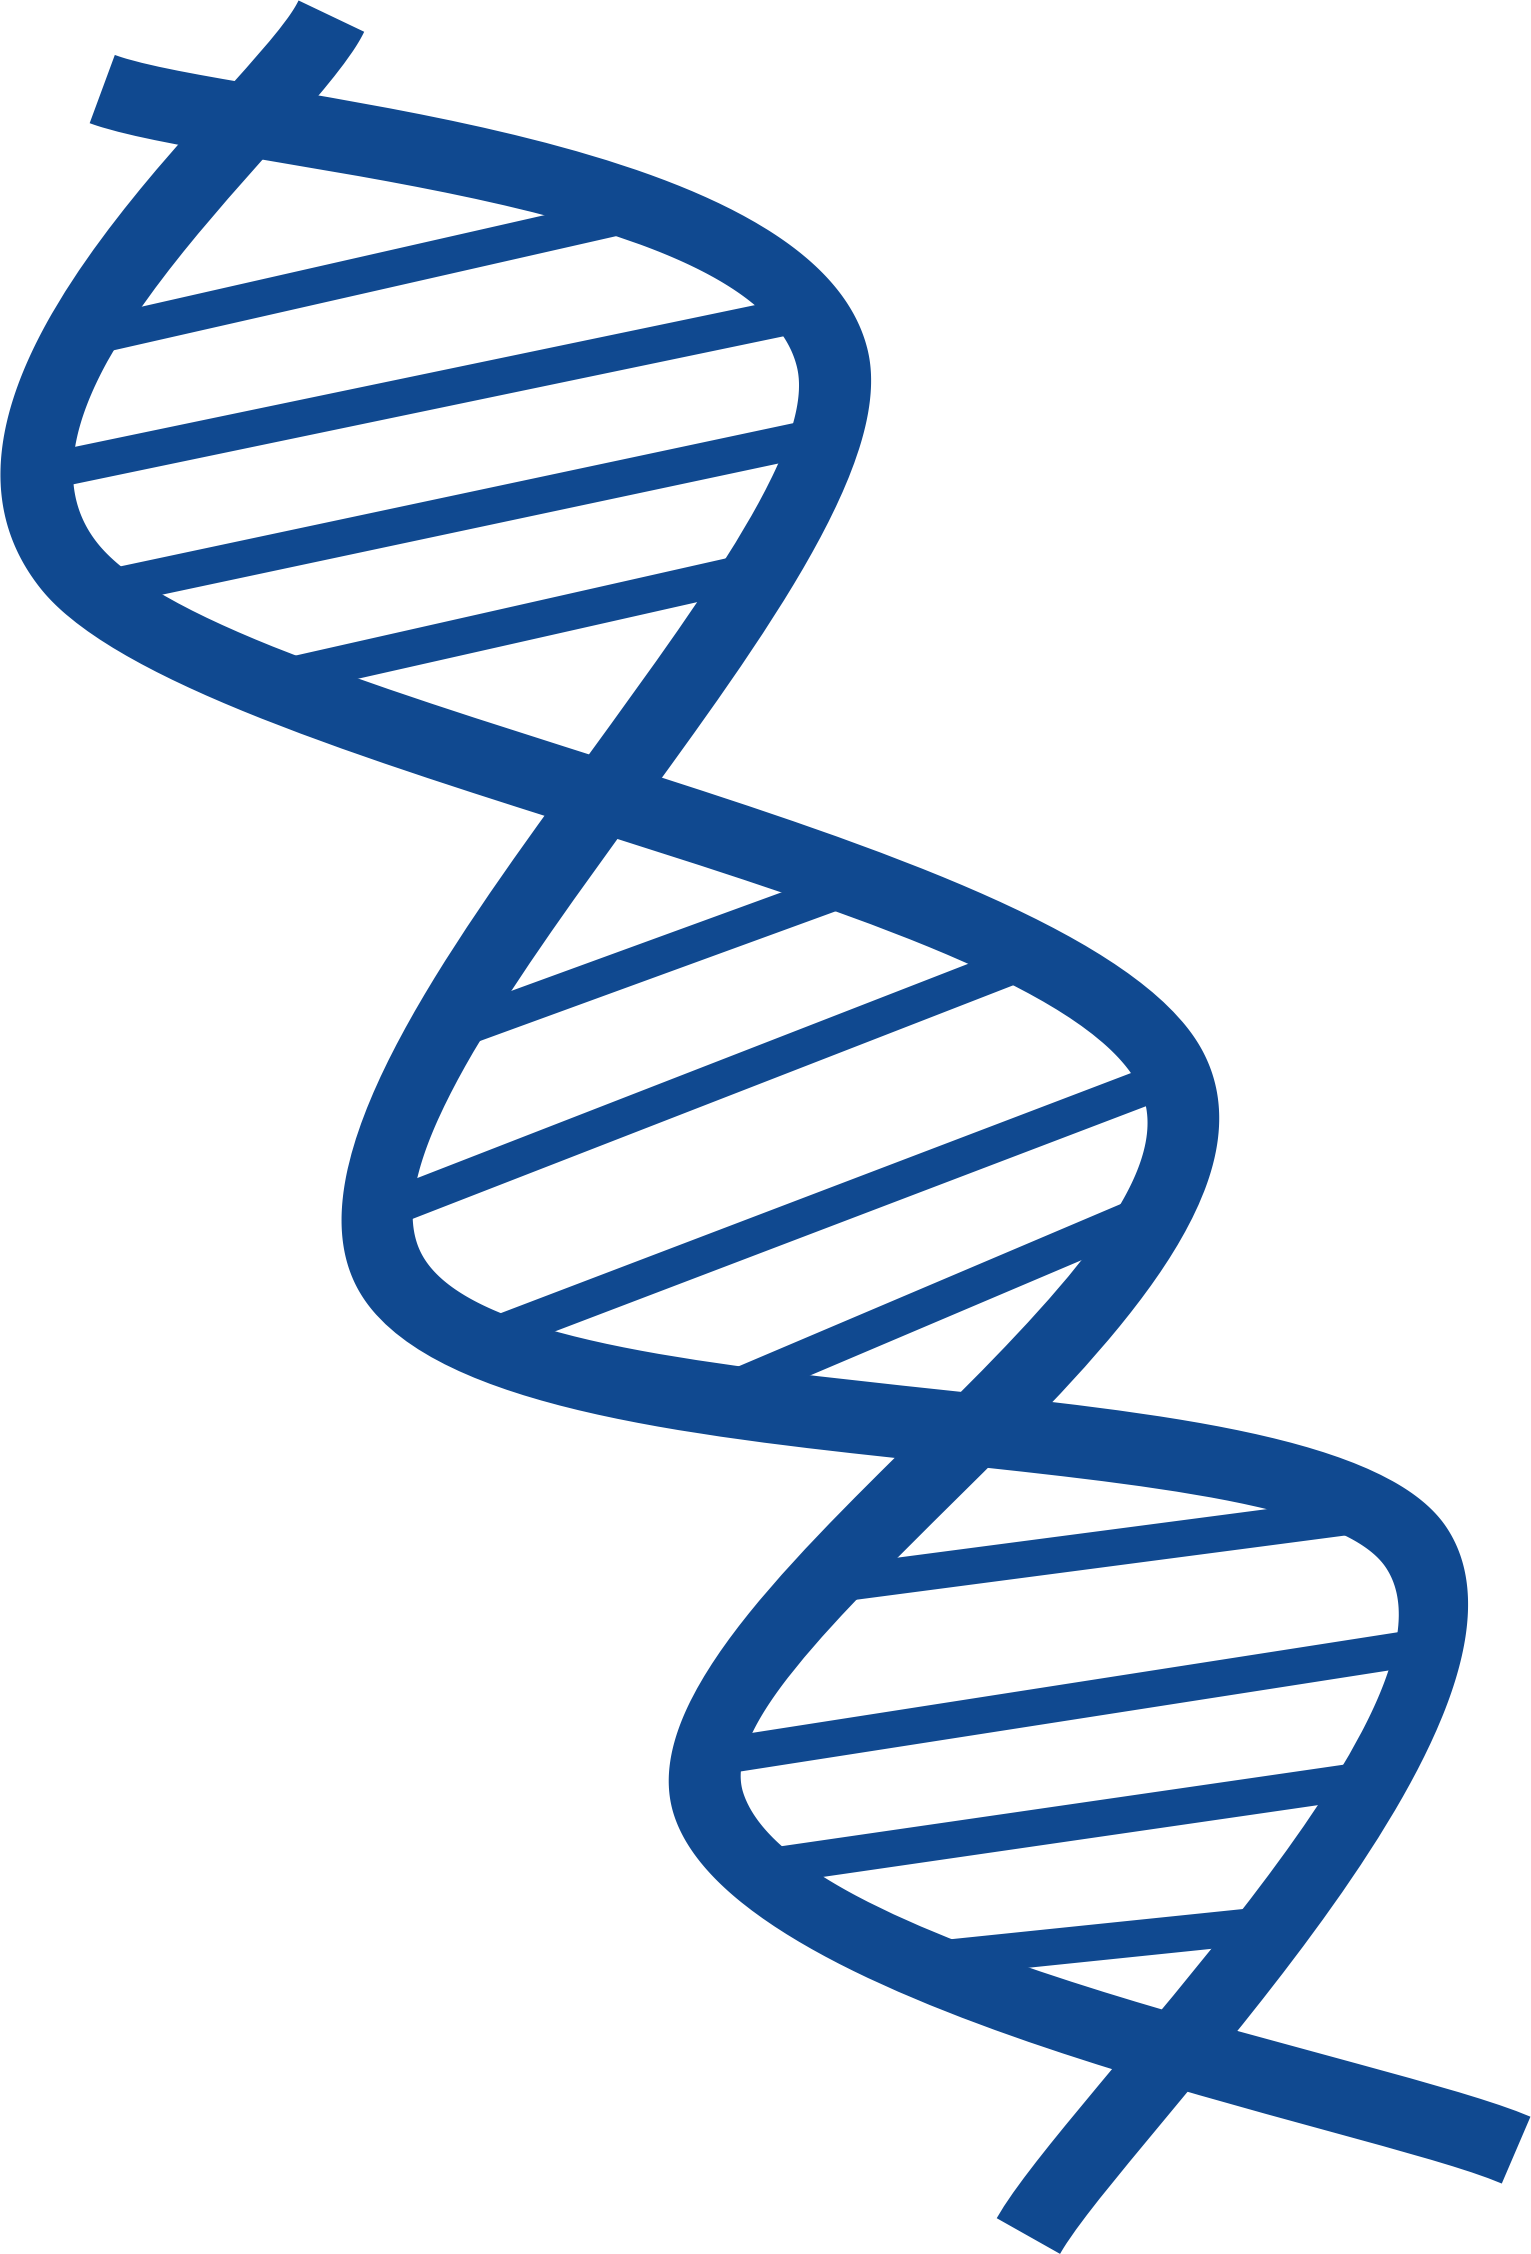 Clipart Of Dna, Genes And Gene - Biology.